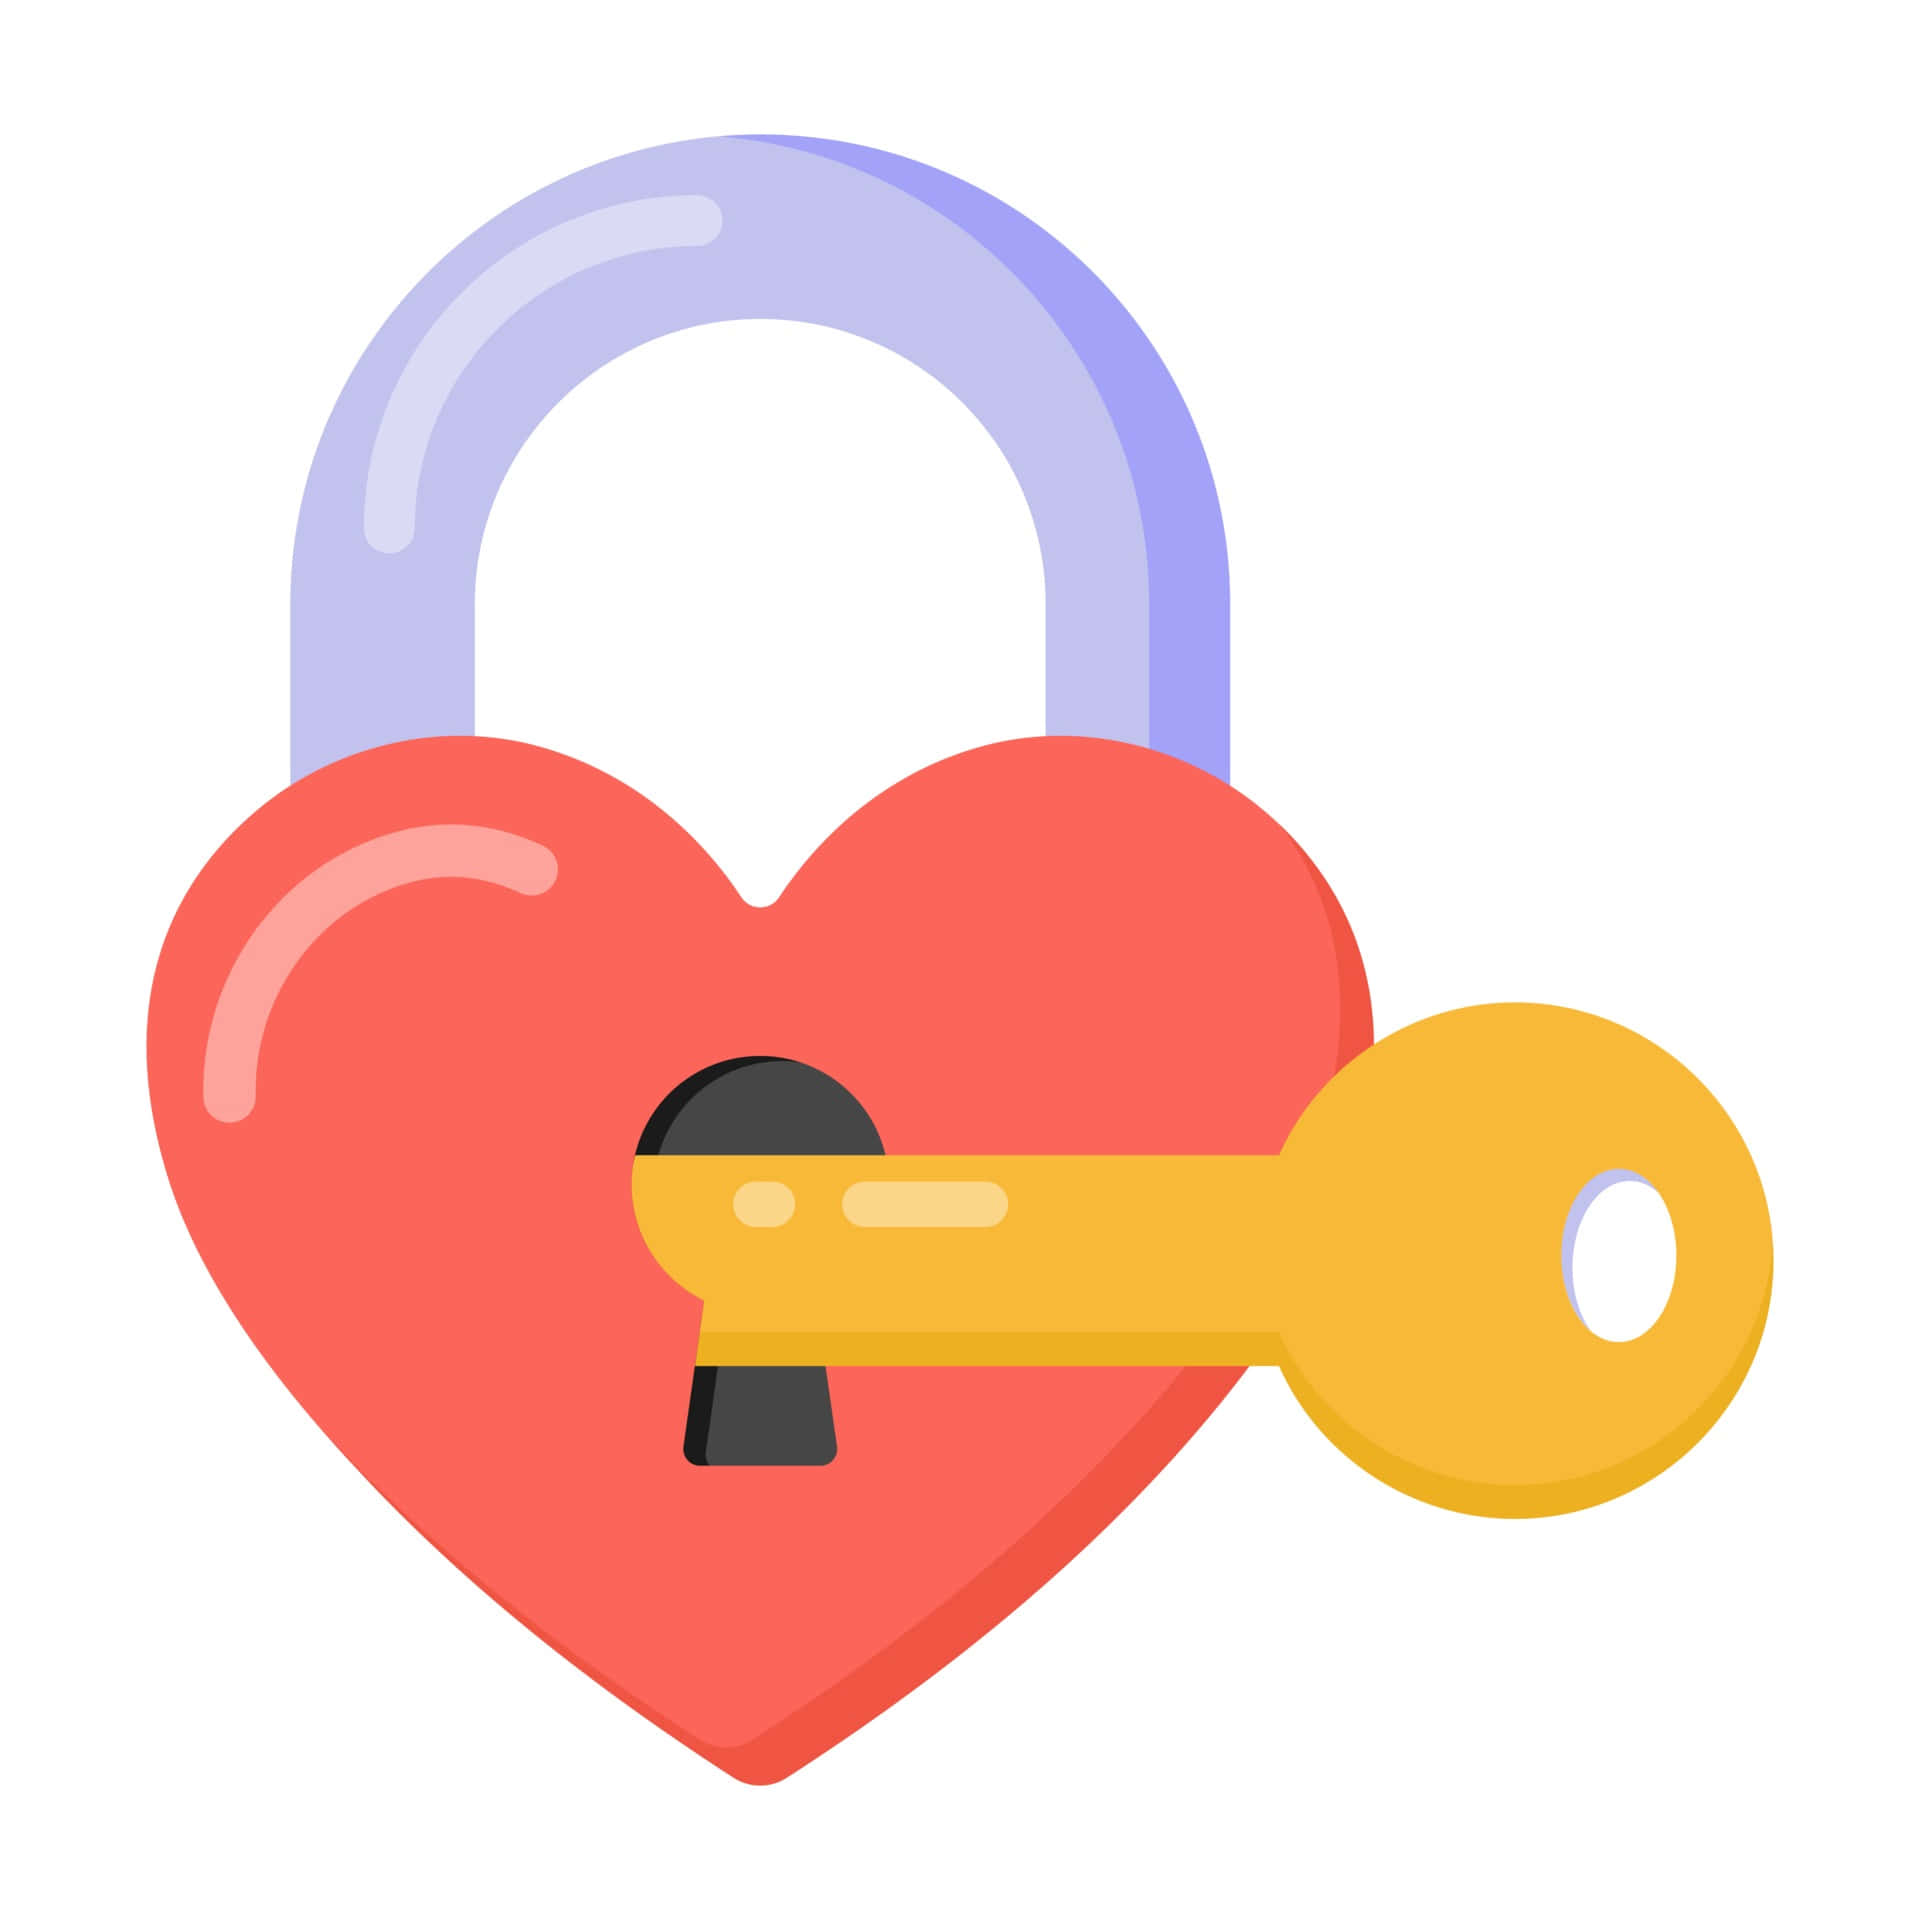 A Heart With A Key And Lock